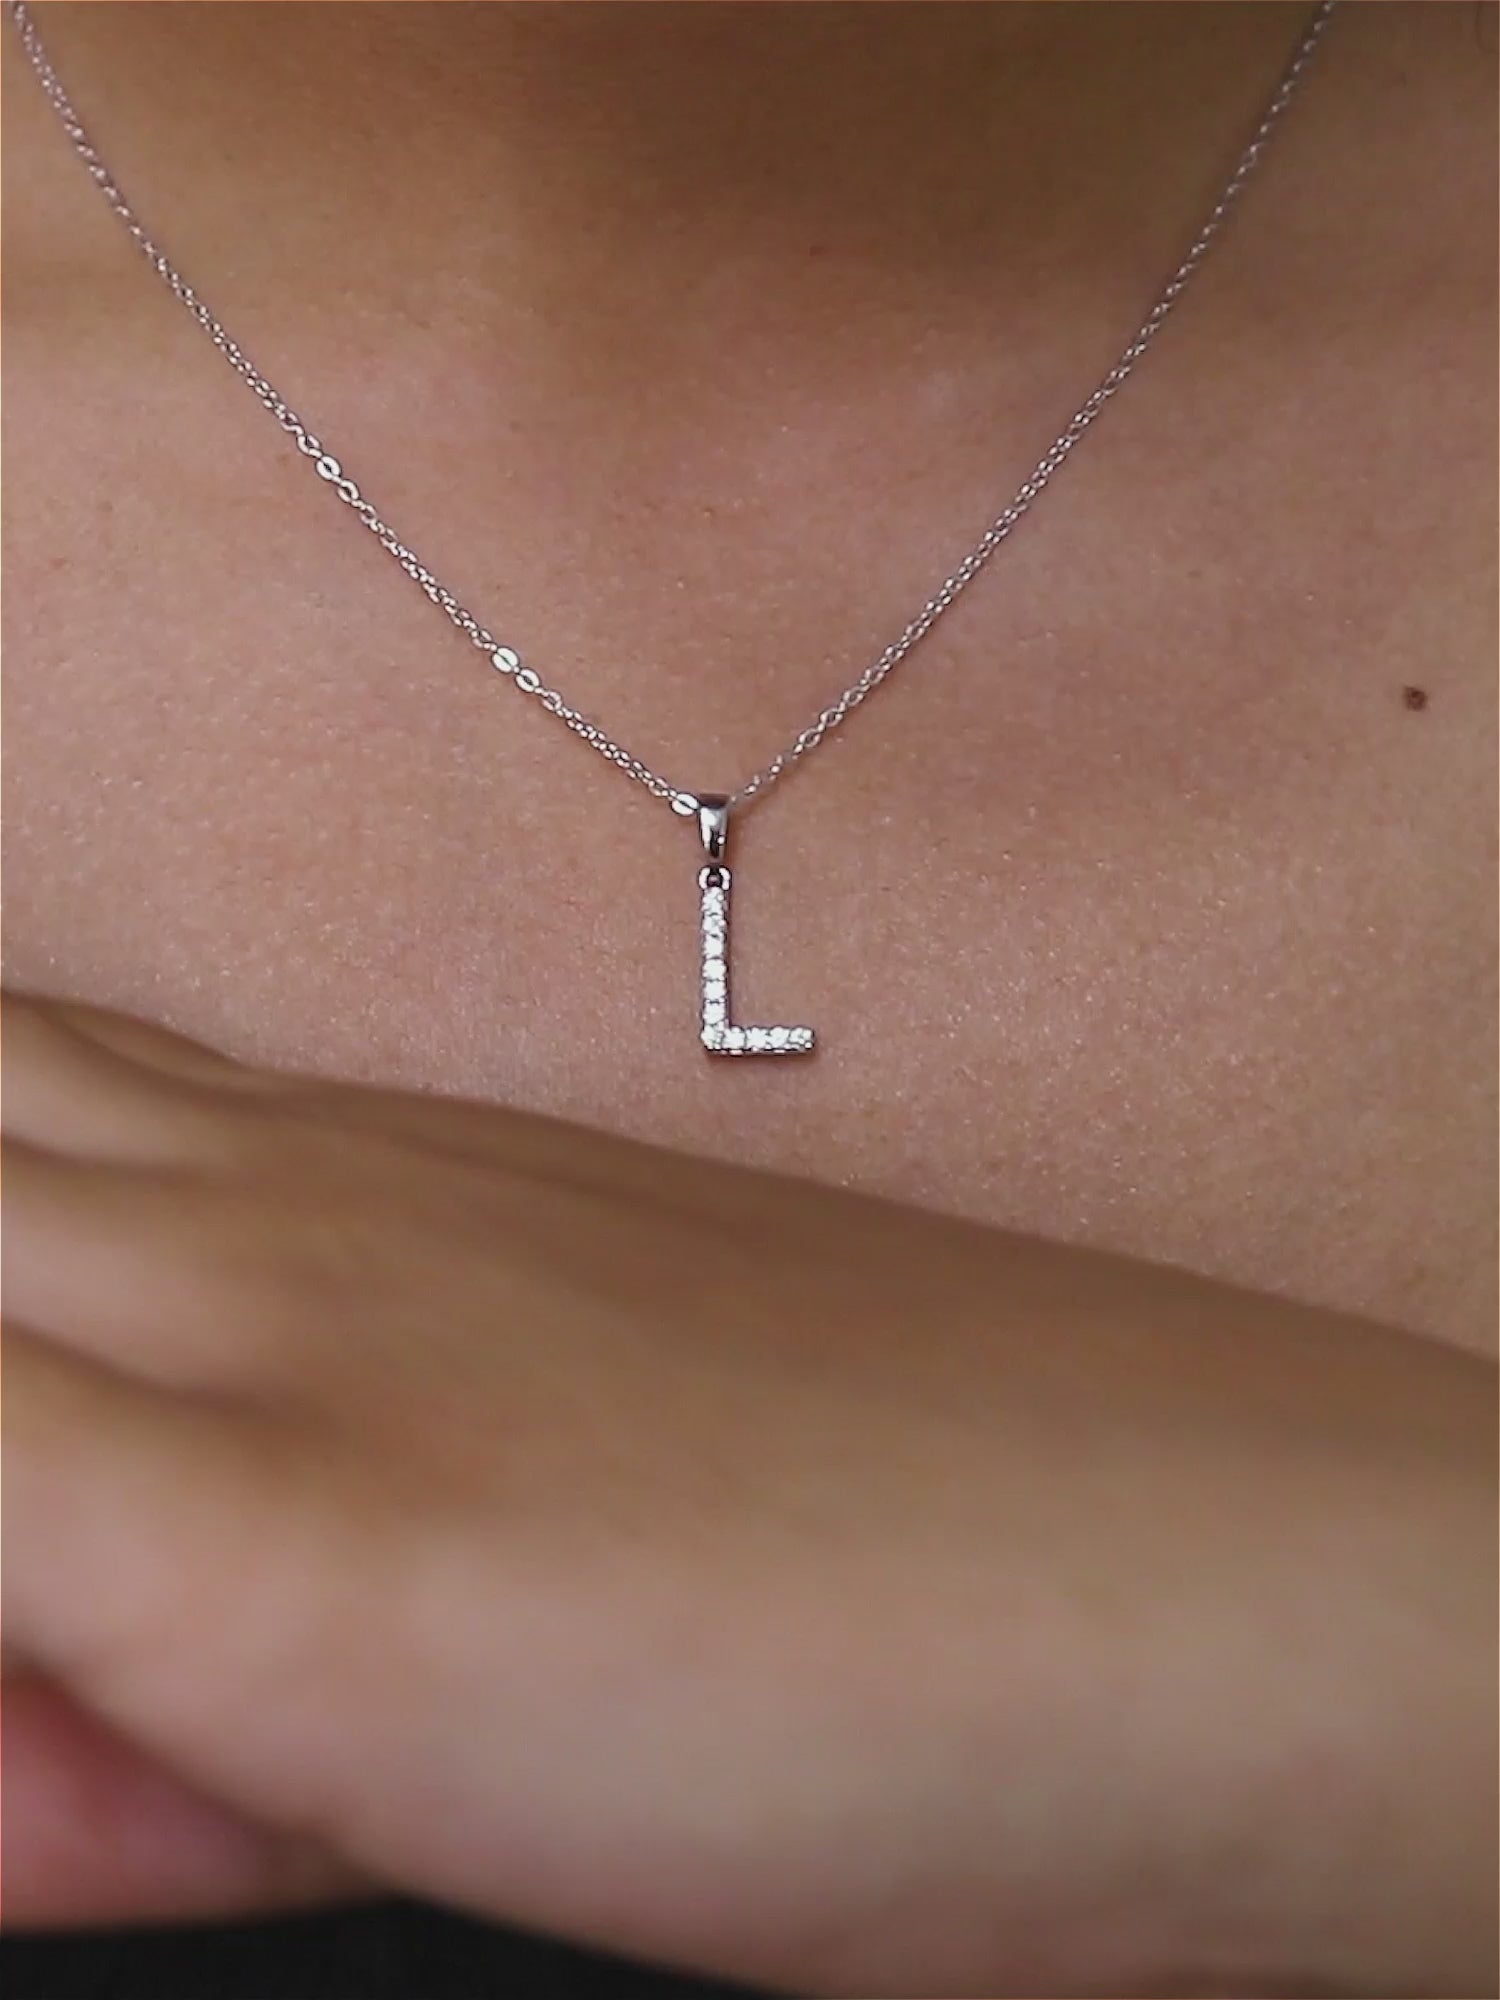 SILVER L INITIAL LETTERS OR ALPHABET NECKLACE WITH AMERICAN DIAMONDS